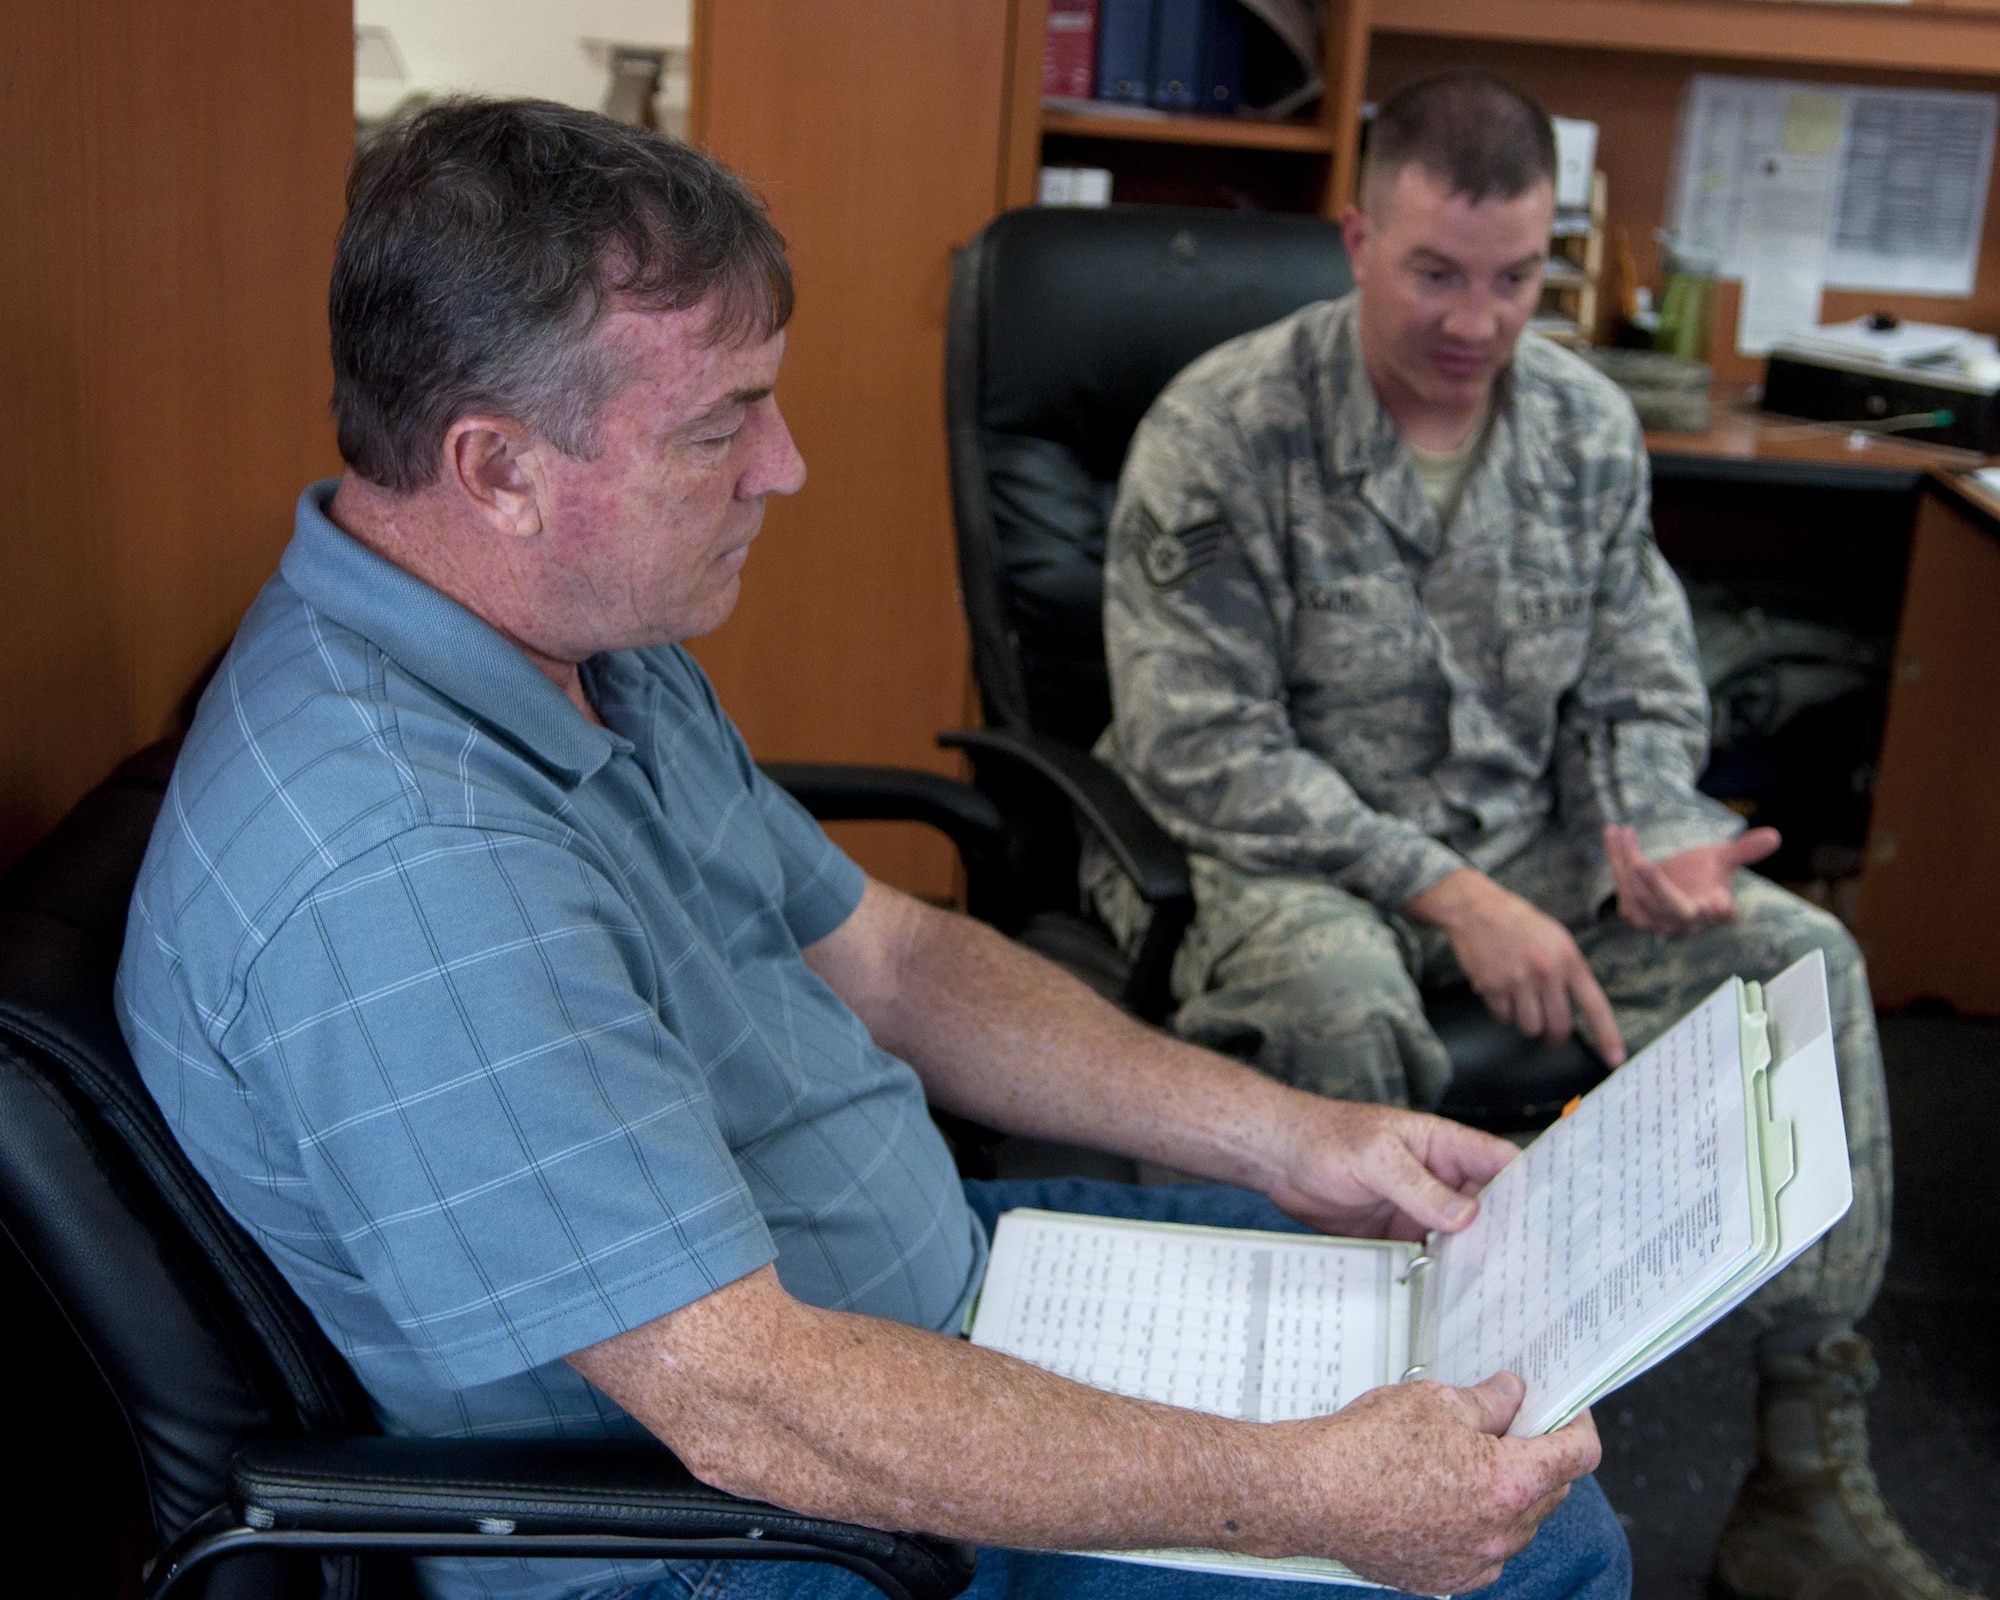 Richard Mullee, the 90th Missile Wing Safety Office missile safety superintendent, reviews the 90th Missile Maintenance squadron checklists during an annual weapons safety inspection June 9, 2015, on F.E. Warren Air Force Base, Wyo. The office reviews checklists and guidance to assist Airmen on the job, while remaining safe in their work environment. (U.S. Air Force photo/Airman 1st Class Malcolm Mayfield)